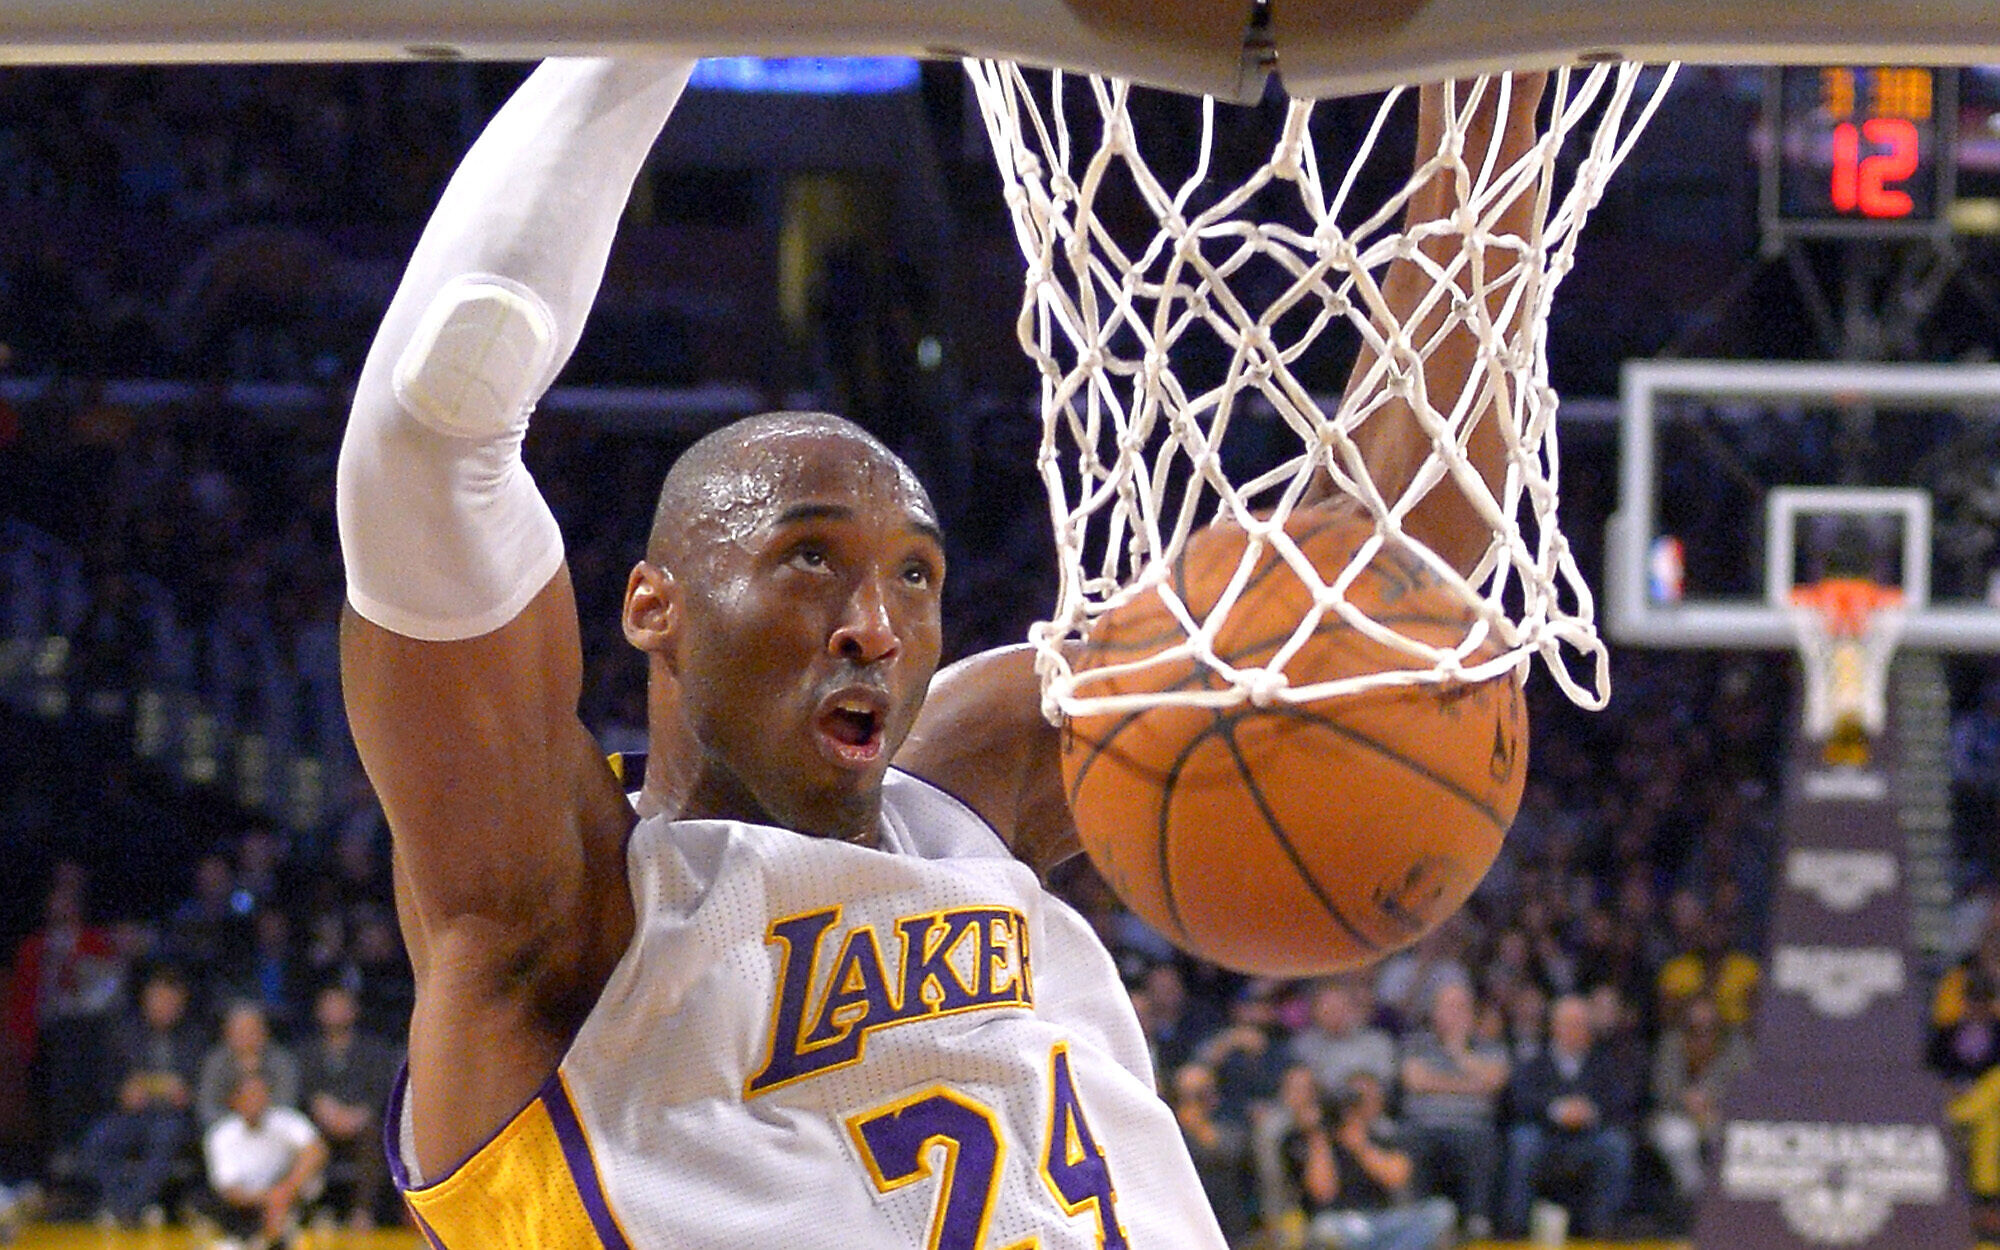 Comedy Club Drops Comedian Ari Shaffir After Comment About Kobe Bryant The Times Of Israel